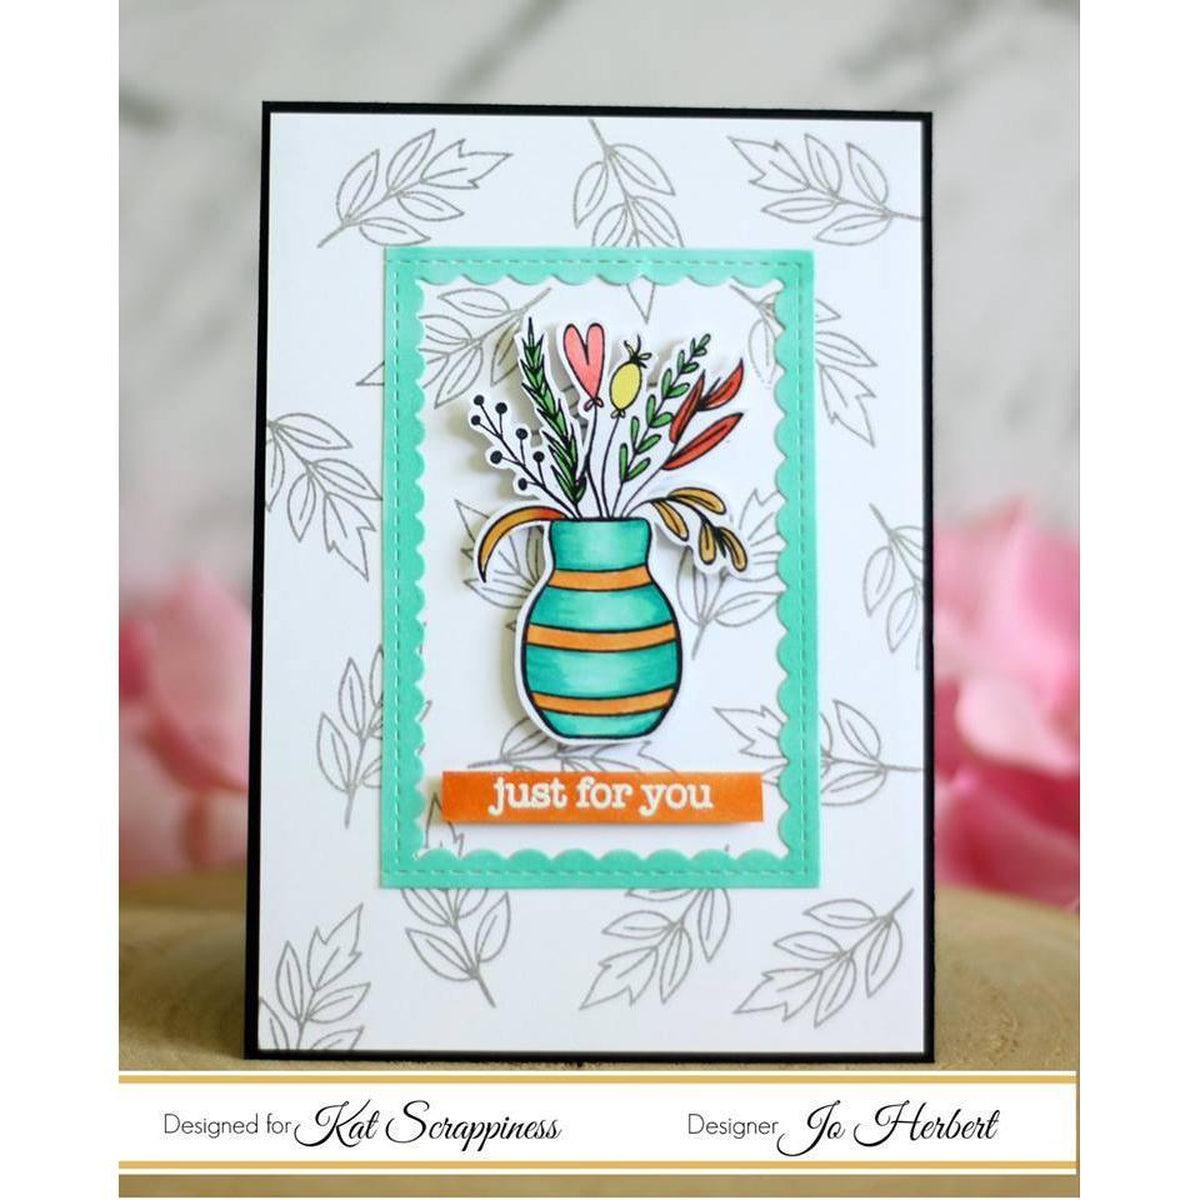 &quot;Happy Fall Y&#39;all&quot; Stamp Set by Kat Scrappiness - Kat Scrappiness